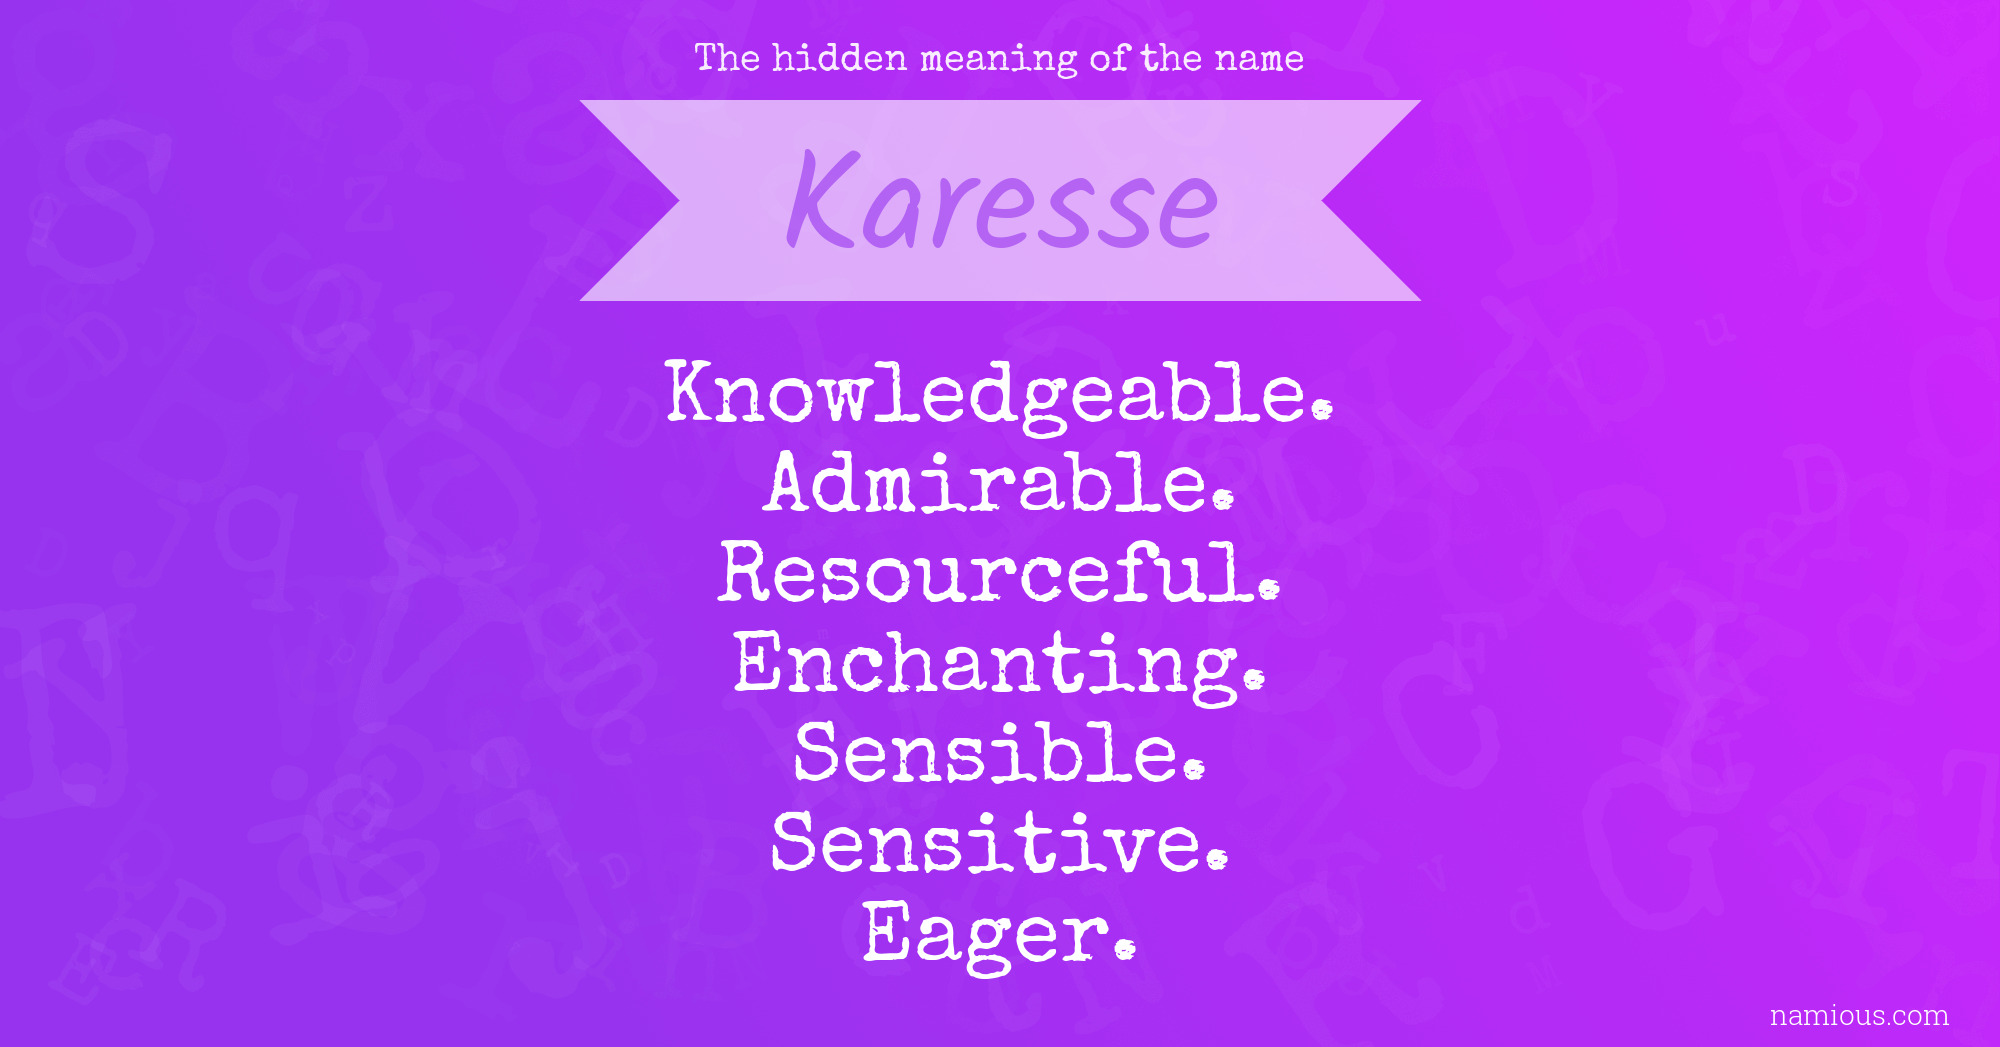 The hidden meaning of the name Karesse